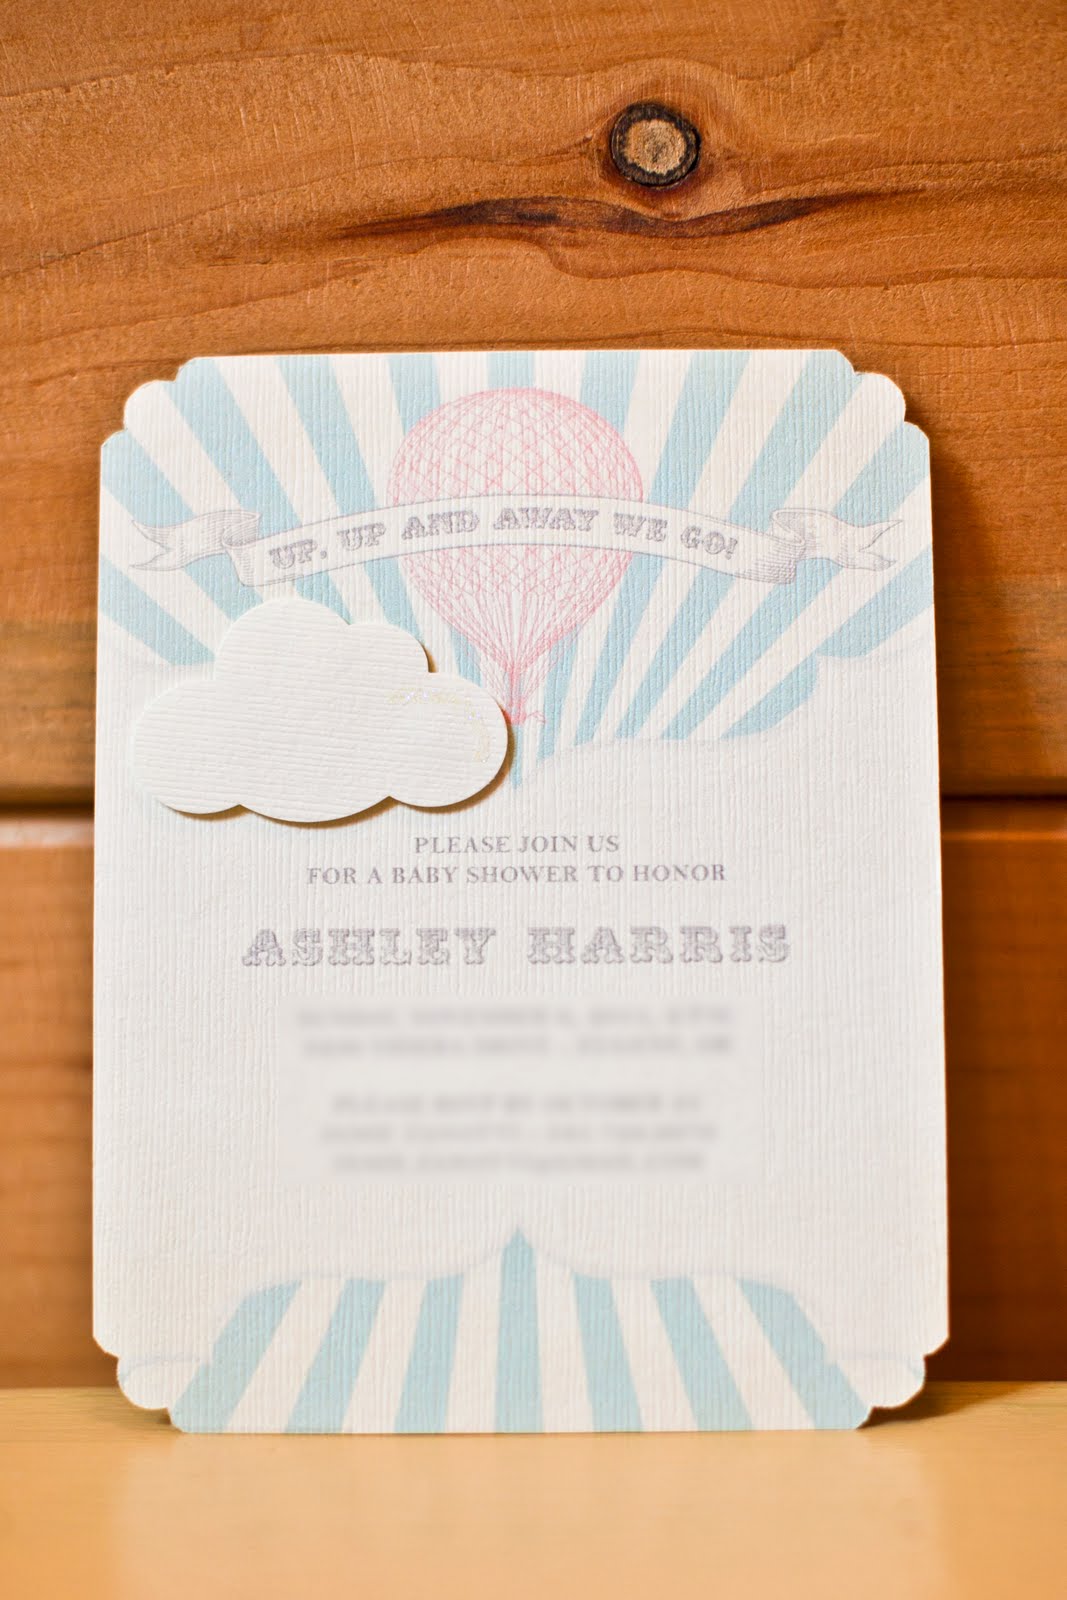 Hot Air Balloon Baby Shower Cake Inspired by Invitation